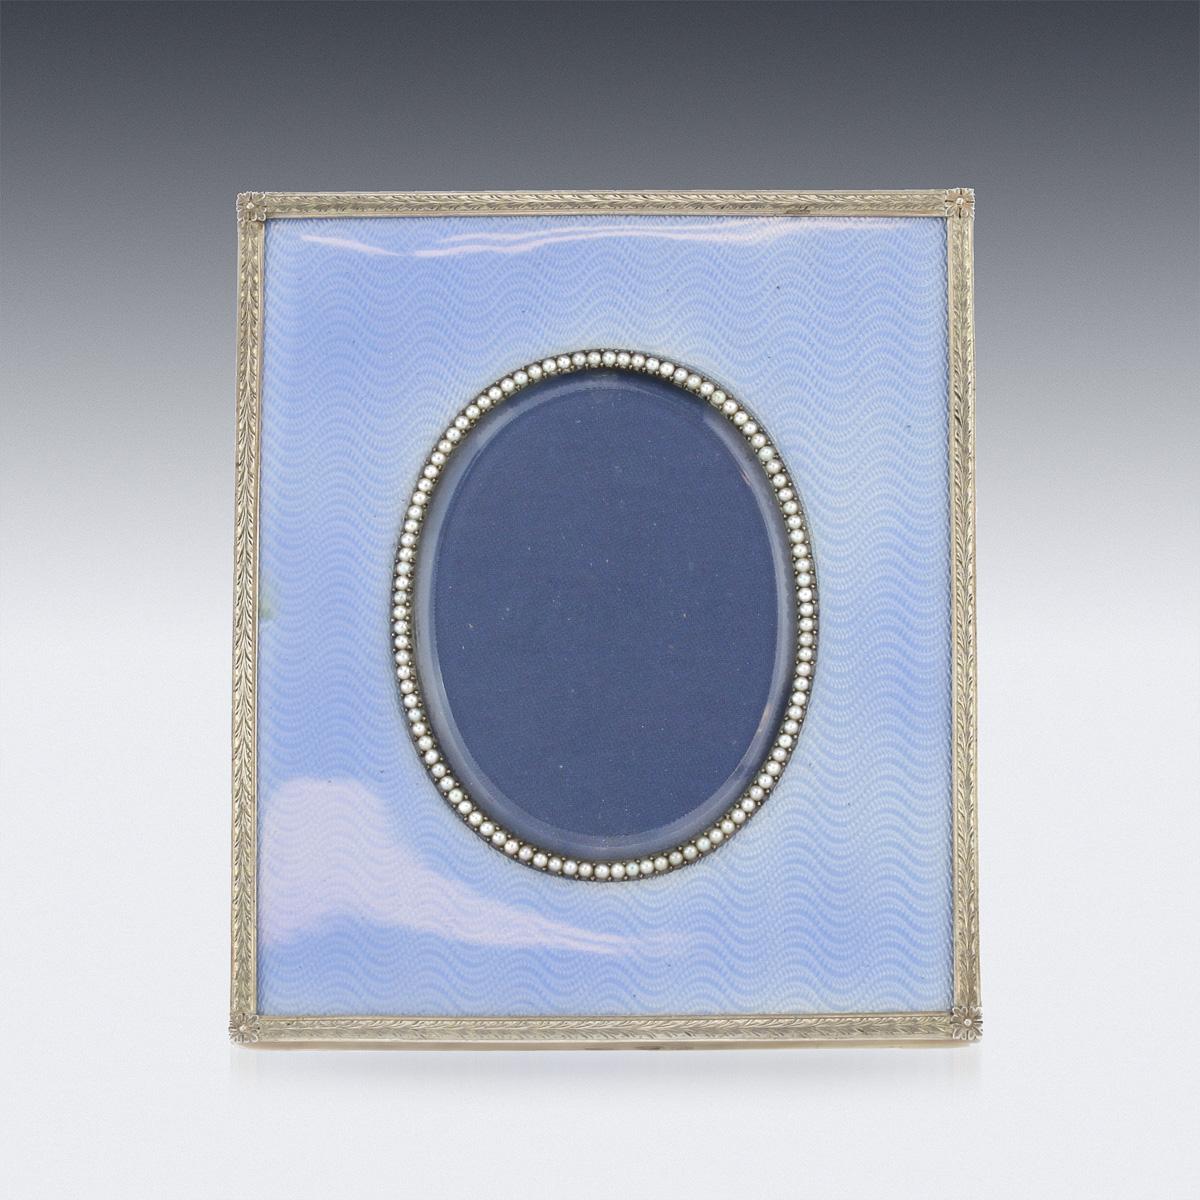 Antique early 20th century exceptional Russian Faberge silver gilt & guilloche enamel photograph frame, of rectangular shape, the sides applied with a leaf border set within translucent light blue-colored enamel over moiré engine-turning, beveled